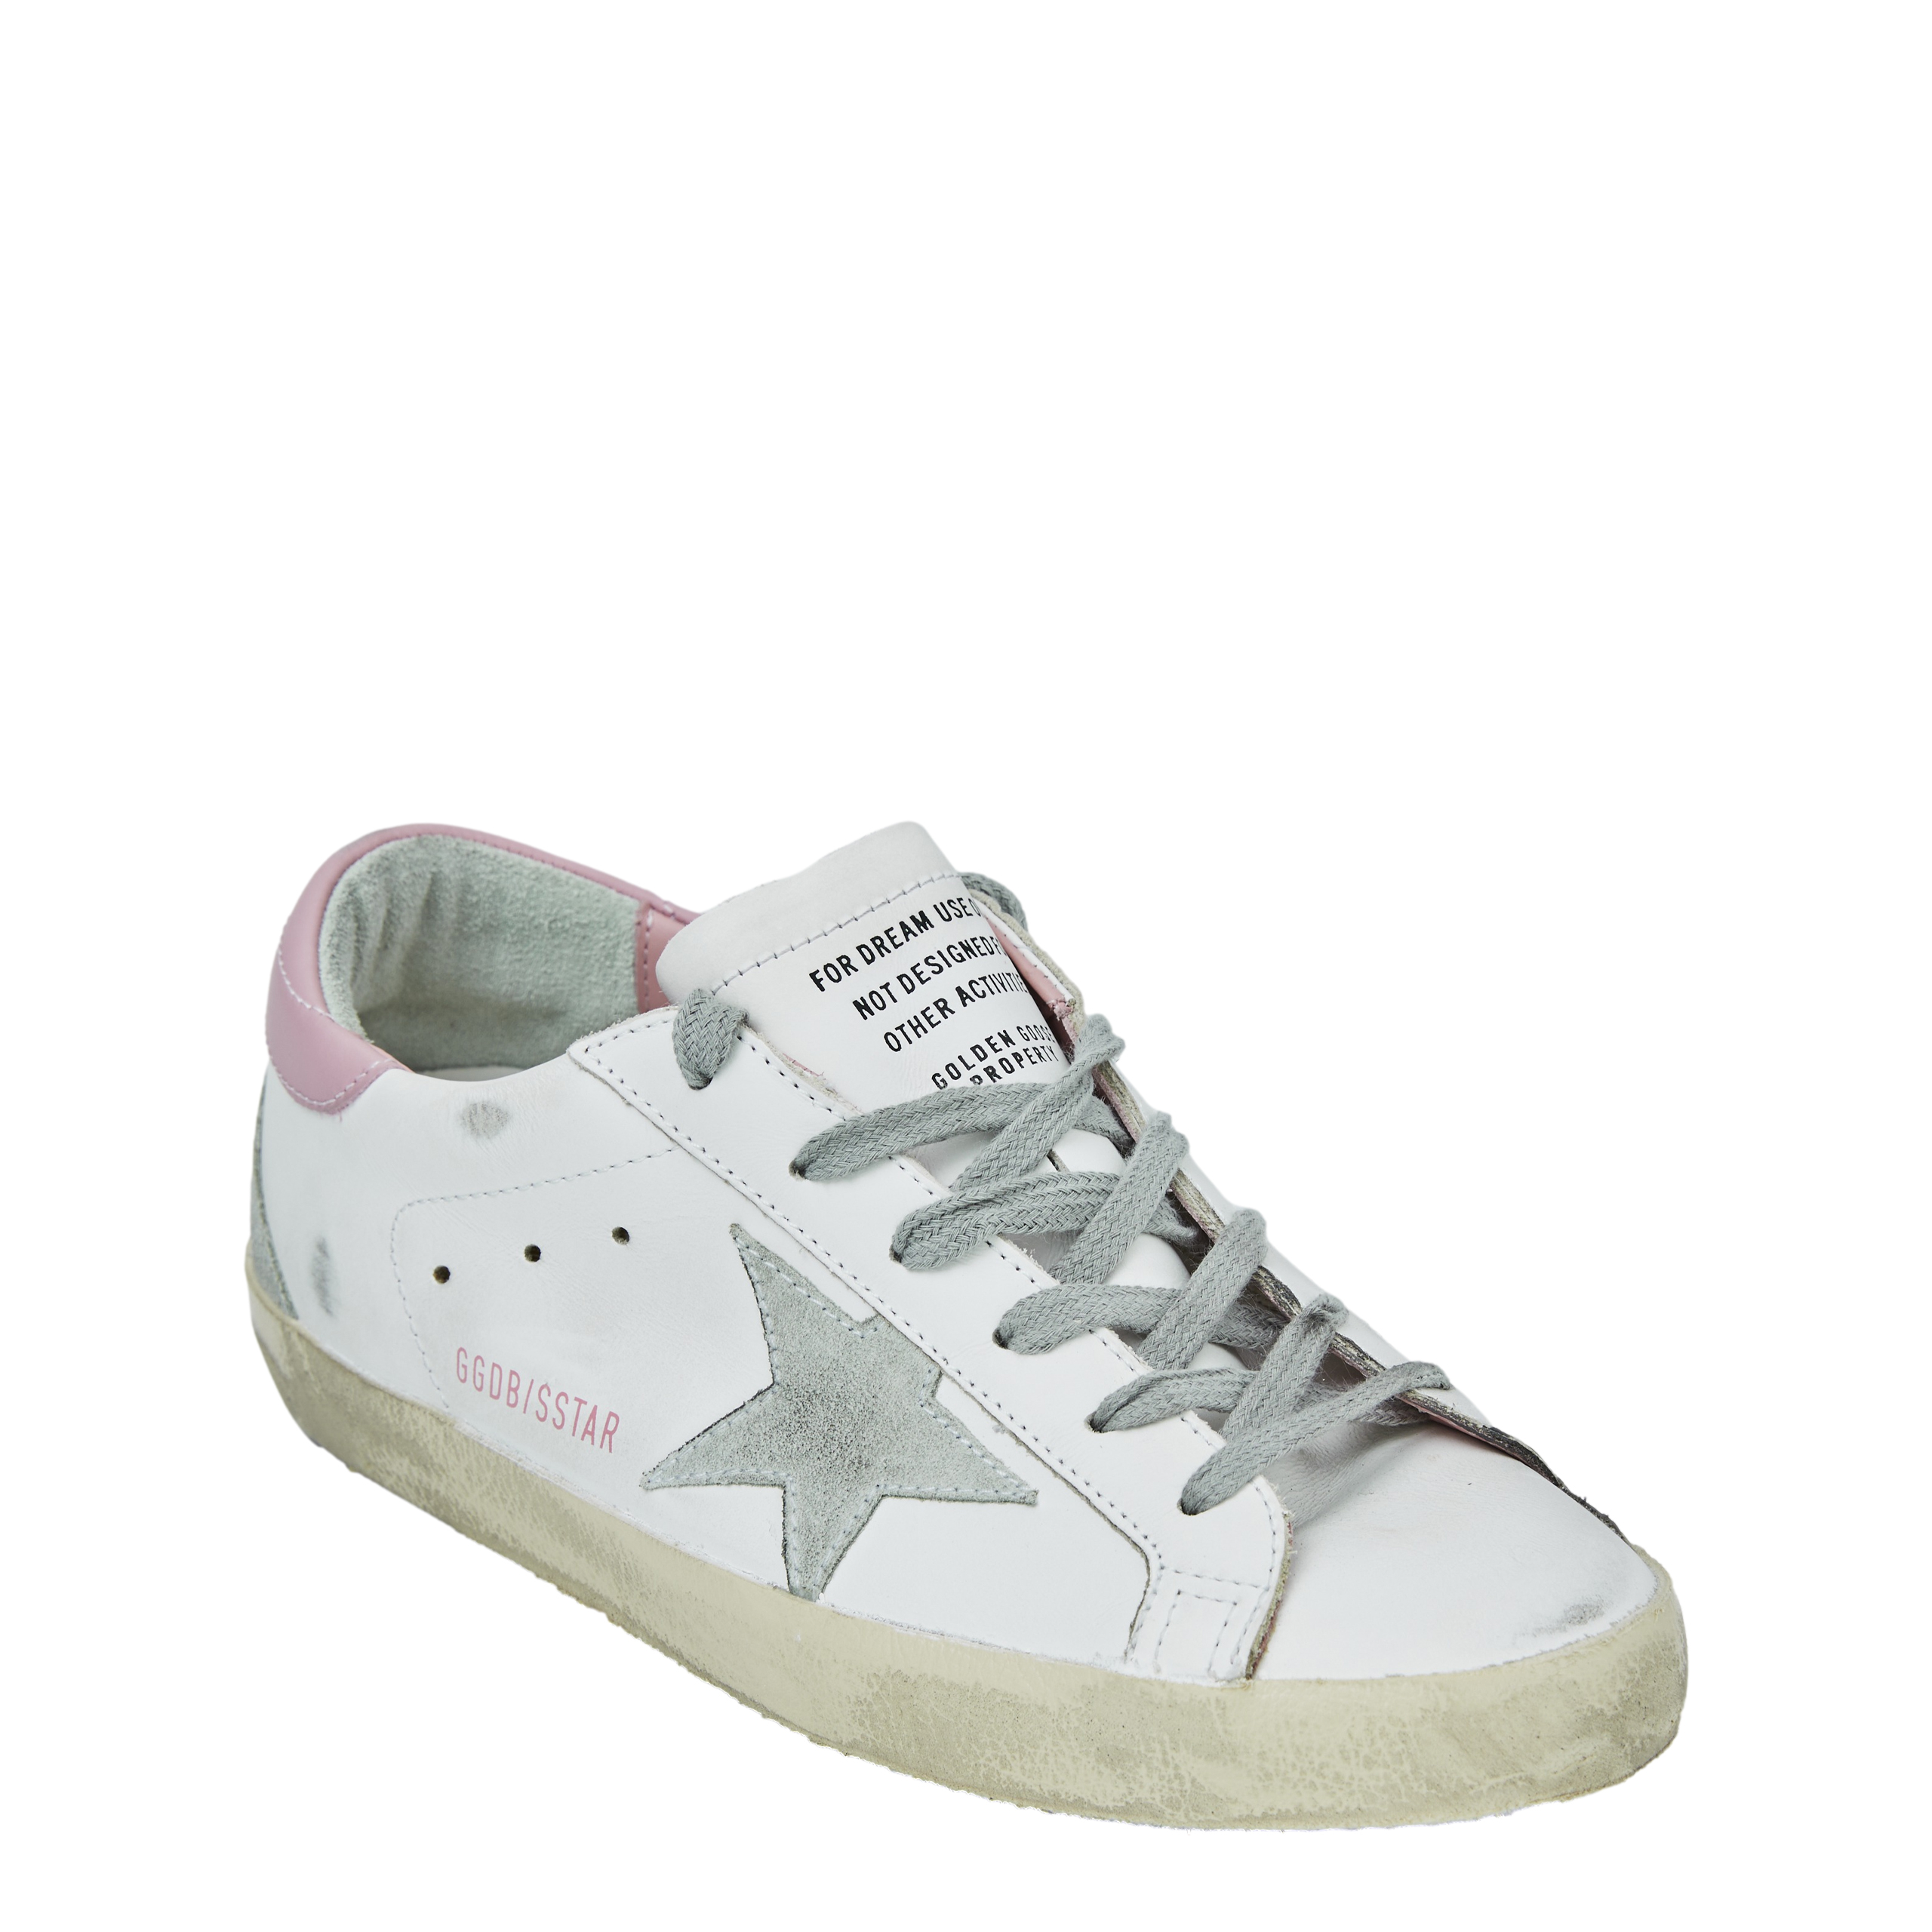 None Golden Goose Deluxe Brand GWF00102/F002569/10914, размер 38;41 GWF00102/F002569/10914 - фото 1